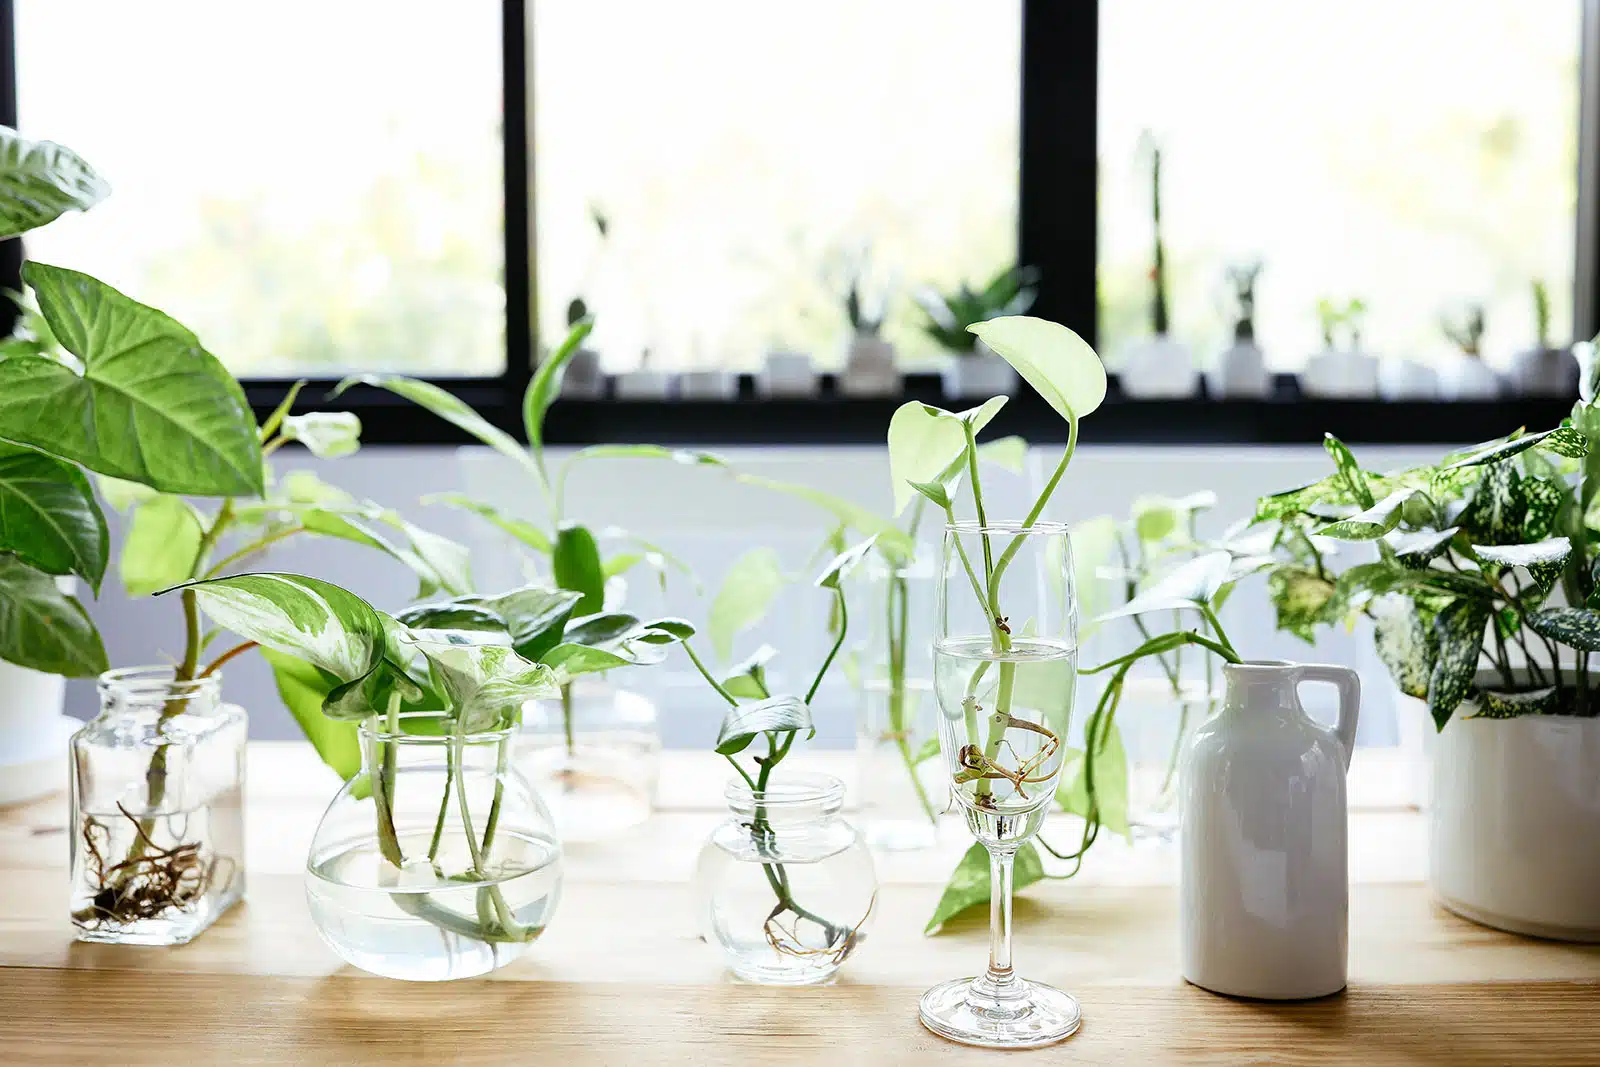 No Soil Needed! Here Are 5 Plants That Grow In Water